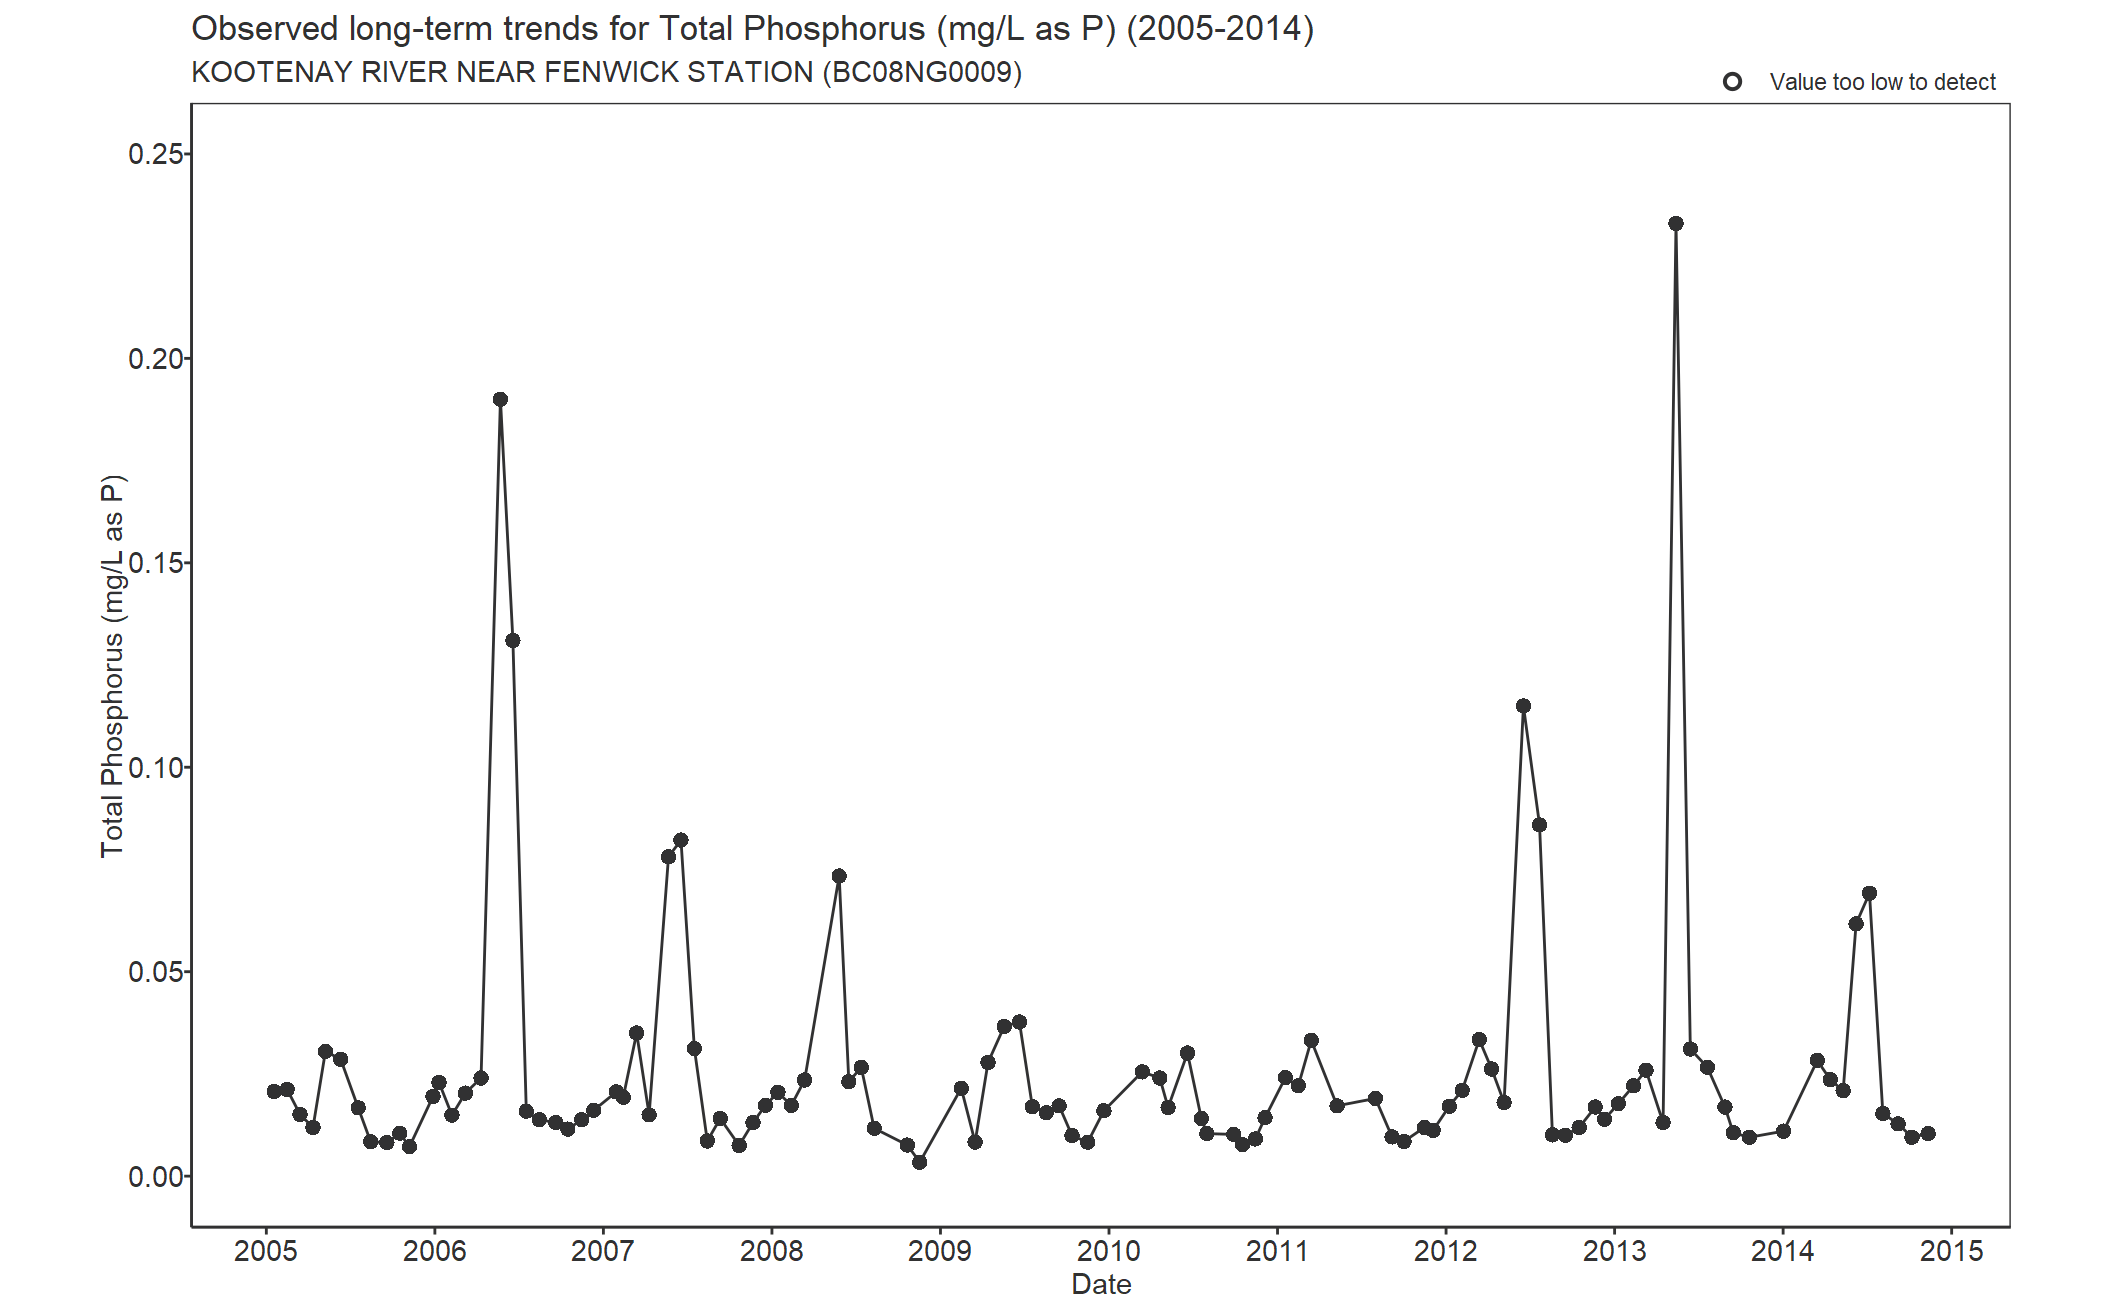 Observed long-term trends for Phosphorus Total (2005-2014)